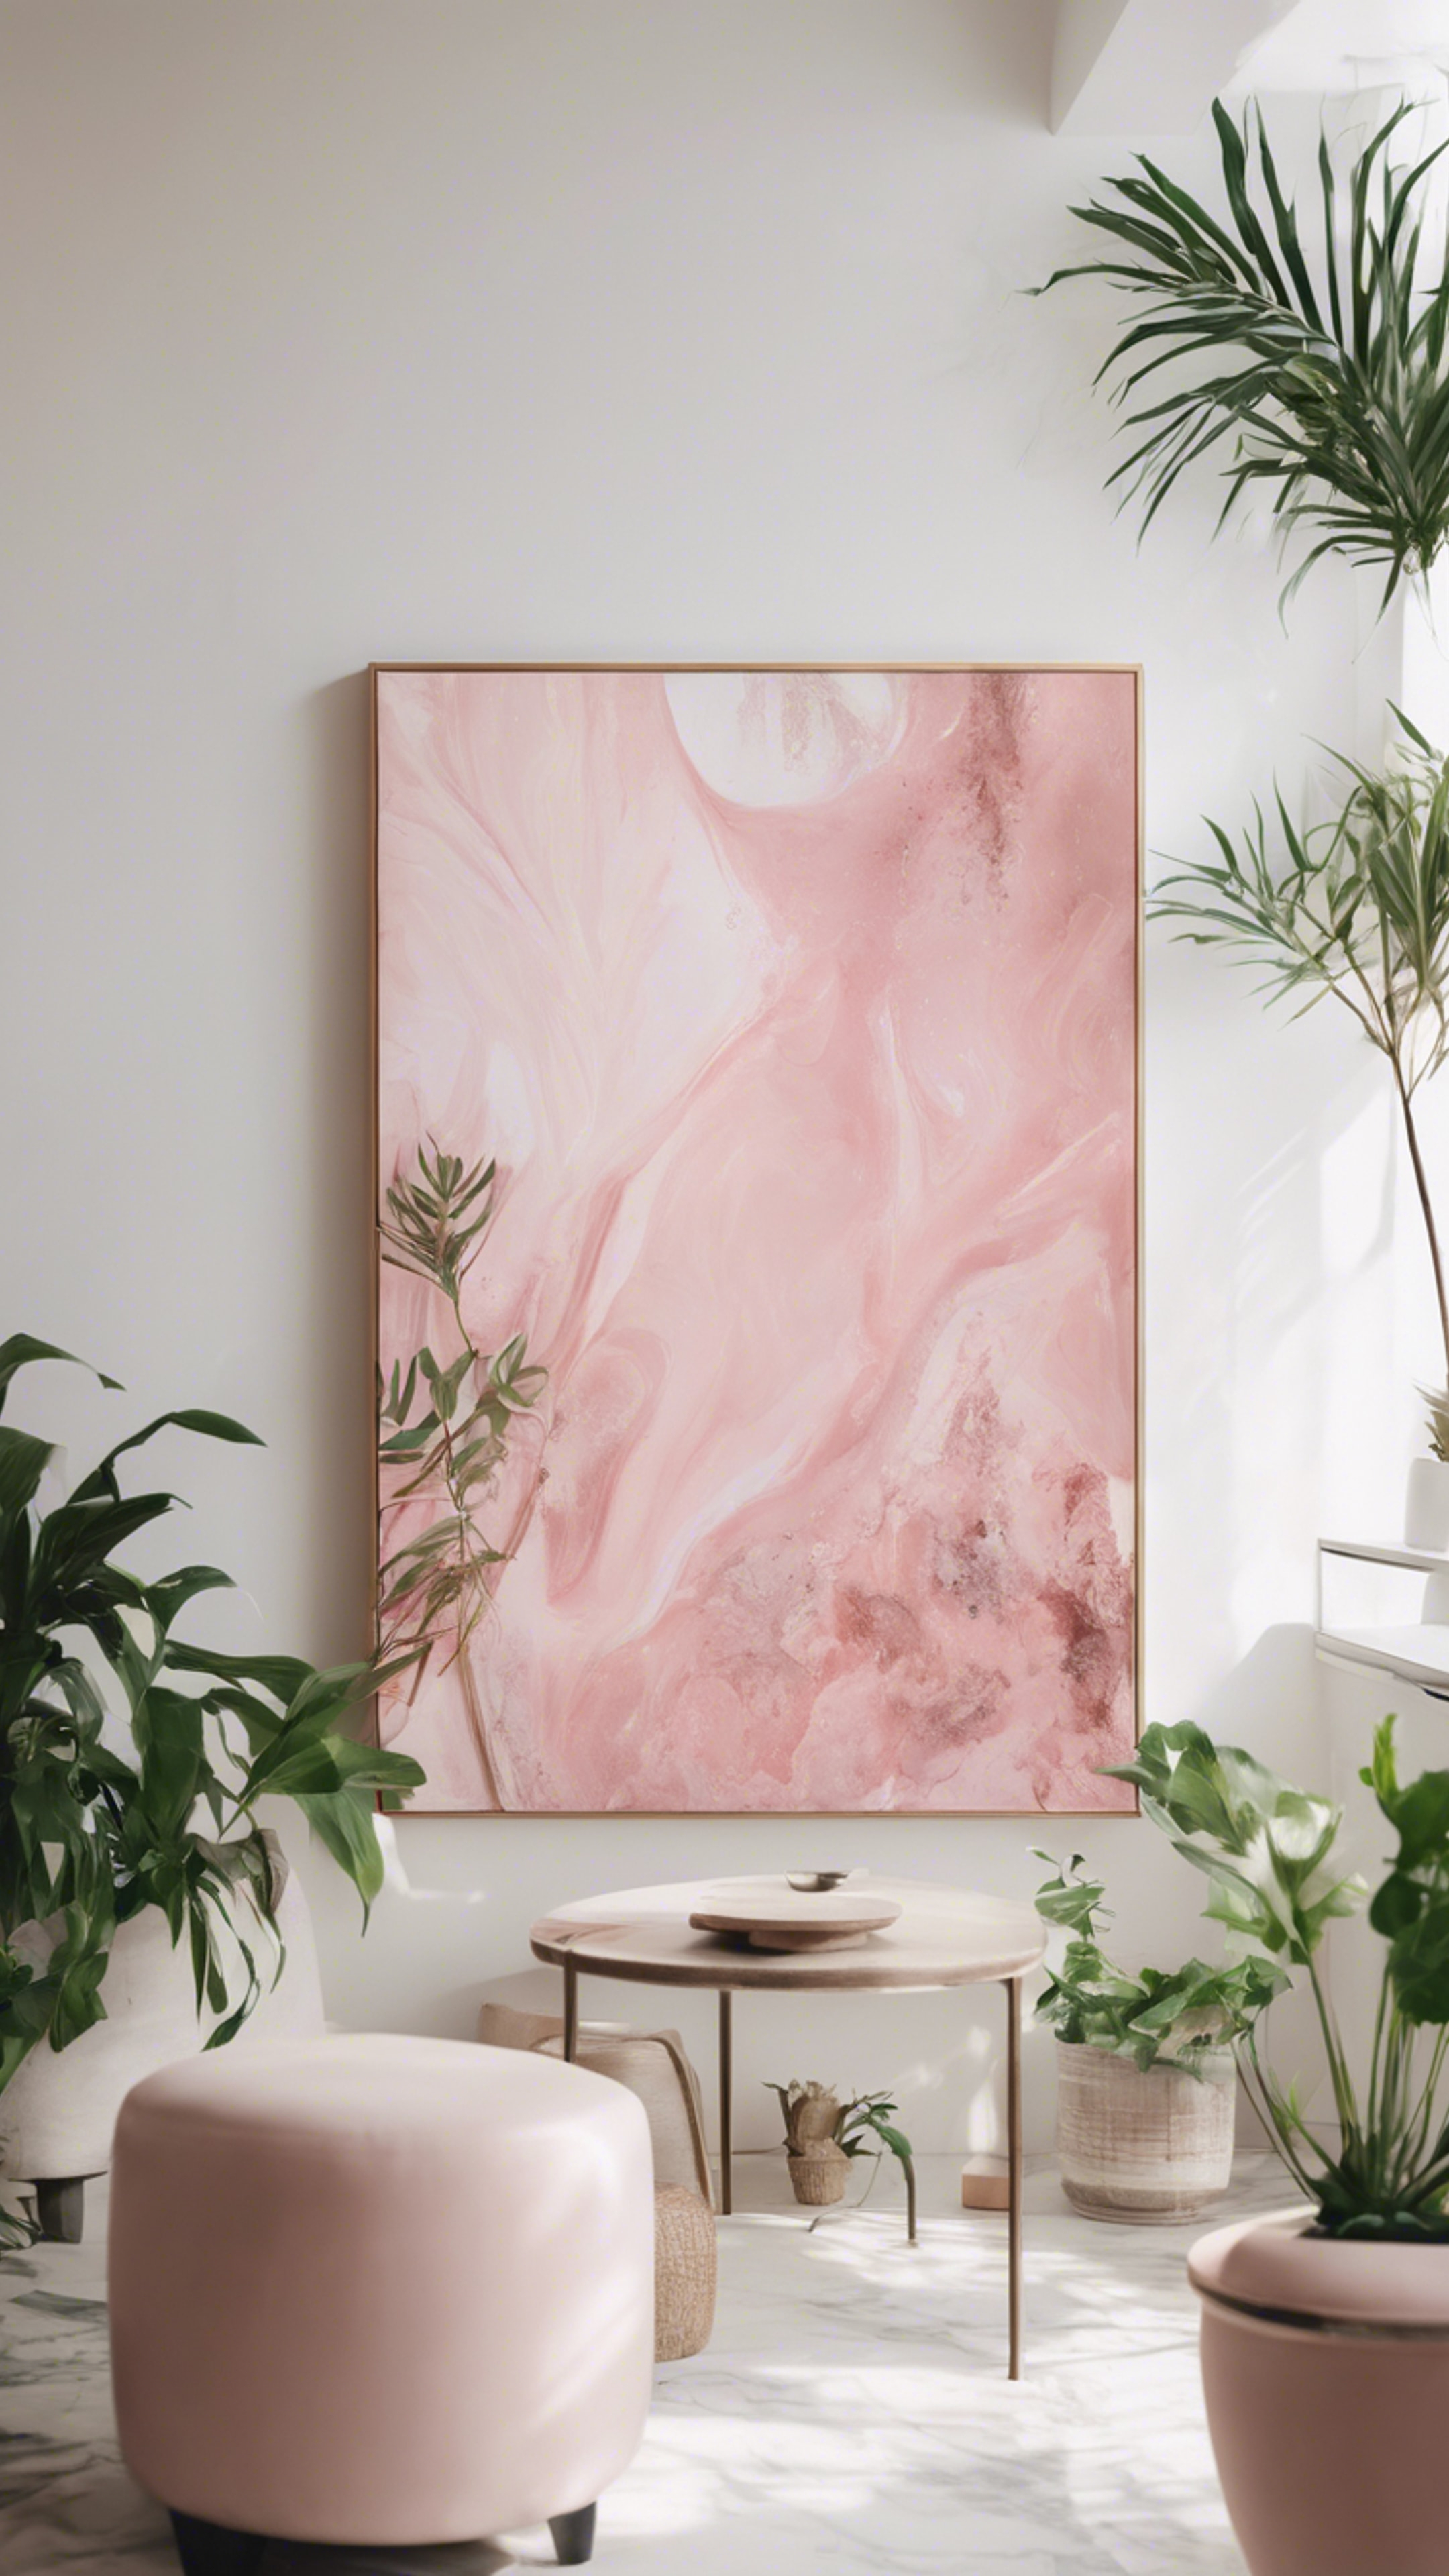 A soft pink abstract painting on a white wall surrounded by indoor plants, enhancing the aesthetic of the room Ταπετσαρία[9fa4f1f3650f4fbb9955]